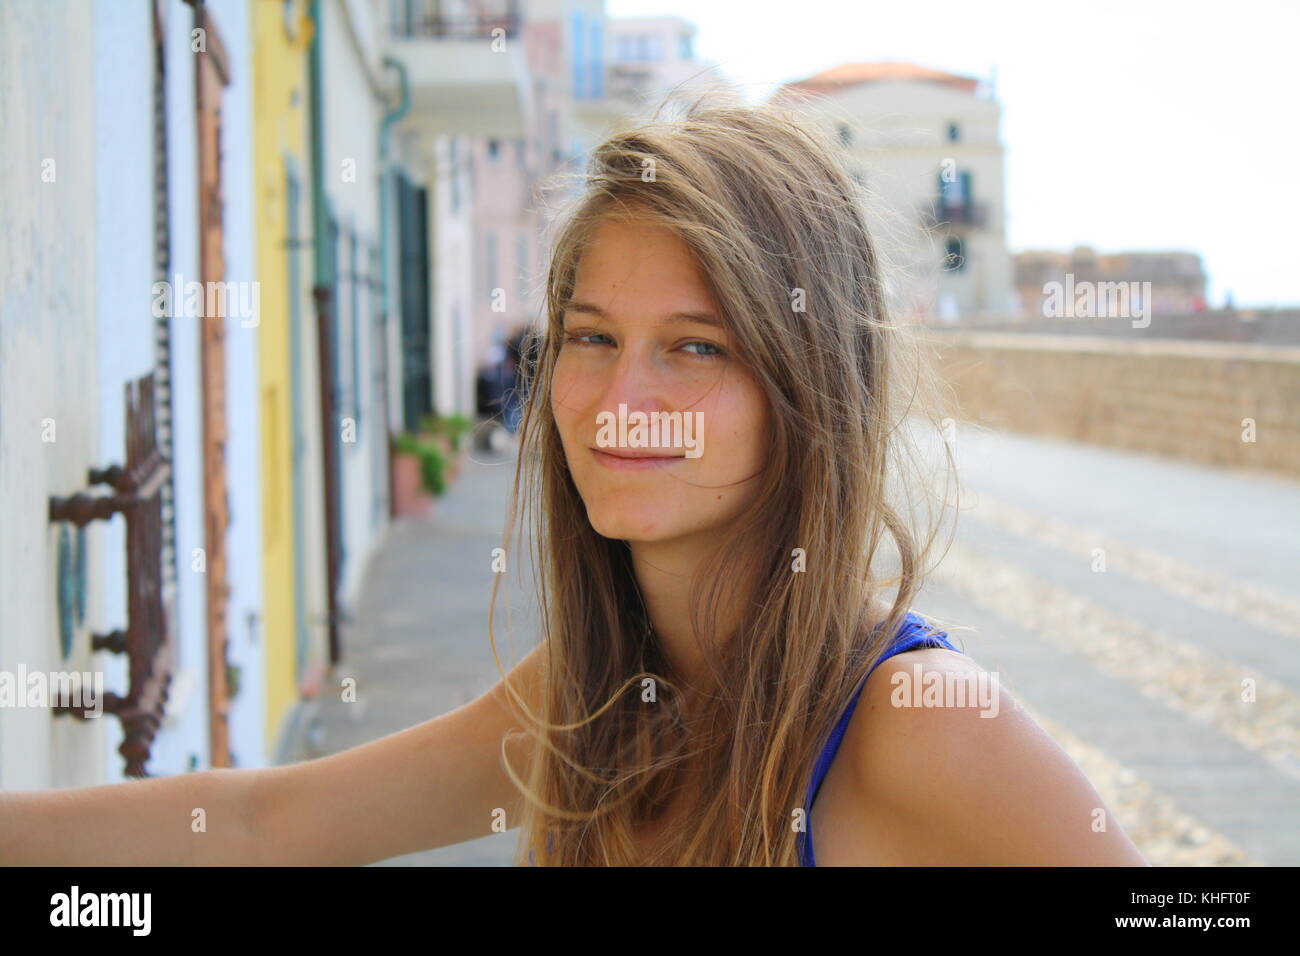 A young tourist woman poses for a personal picture on a vacation spot. Stock Photo